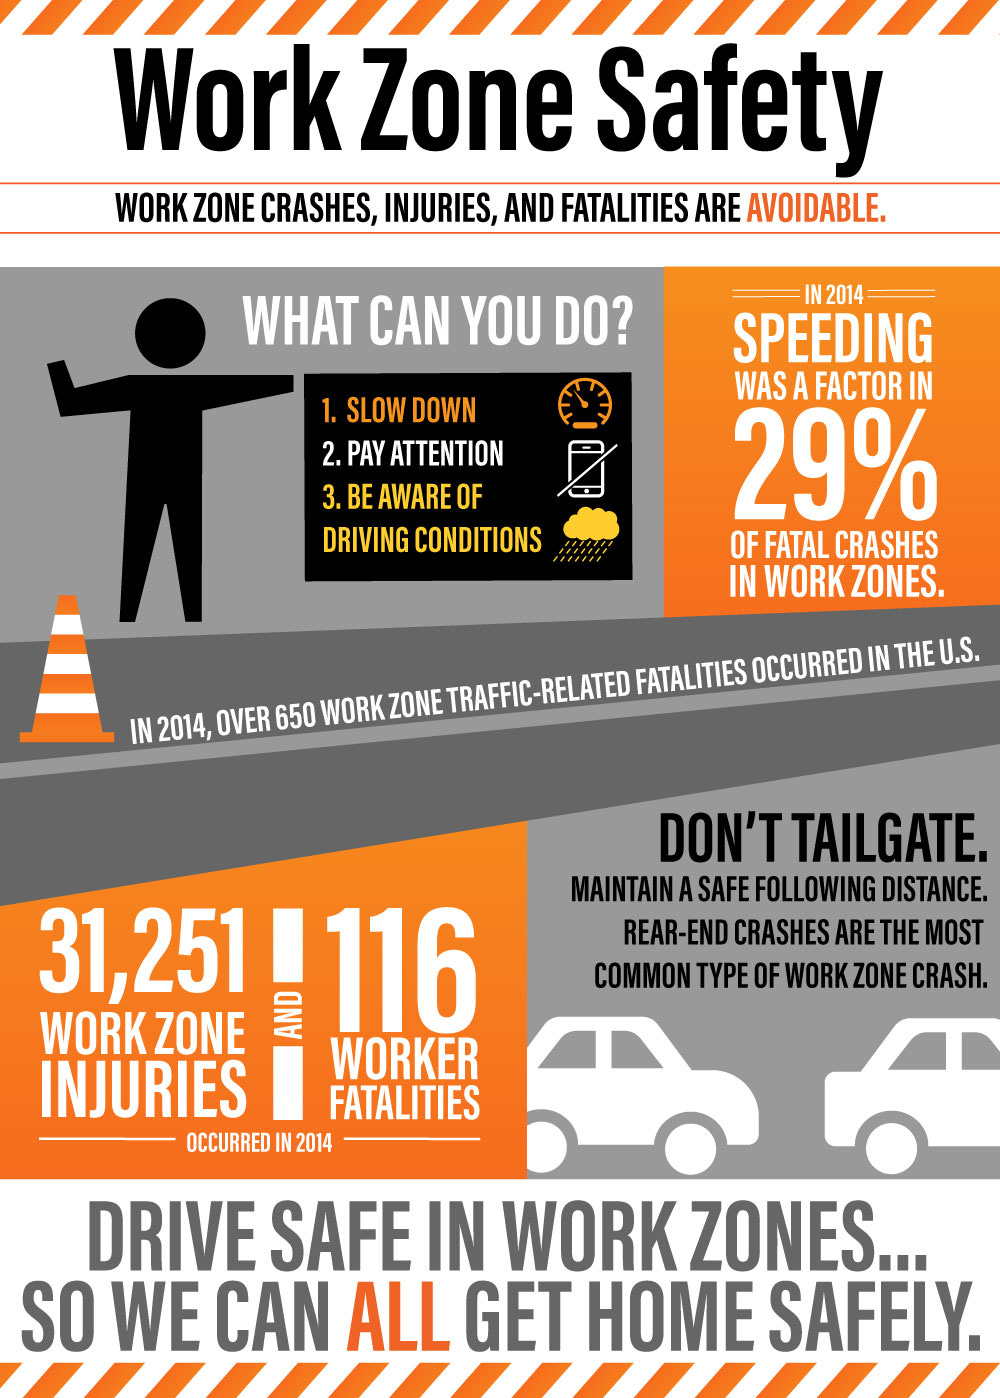 May be an image of car and text that says 'Work Zone Safety WORK ZONE CRASHES, INJURIES, AND FATALITIES ARE AVOIDABLE. WHAT CAN YOU DO? 1. SLOW DOWN 2. 2.PAY ATTENTION 3. BE AWARE OF DRIVING CONDITIONS IN 2014 SPEEDING WAS A IN 29% OF OFFATALCRASHES FATAL CRASHES IN WORK WORKZONES. ZONES. REL IN2014, IN OVER 650 WORK ZONE TRAFFIC-RELATED FATALITIES OCCURRED IN THE .. DON'T TAILGATE. MAINTAIN SAFE AFEFOLLOWING DISTANCE. REAR-END CRASHES ARE THE MOST COMMON TYPE OF WORK ZONE CRASH. 31,251116 116 31,251 WORK ZONE INJURIES WORKER FATALITIES OCCURRED 2014 DRIVE SAFE IN WORK ZONES... SO WE CAN ALL GET HOME SAFELY.'